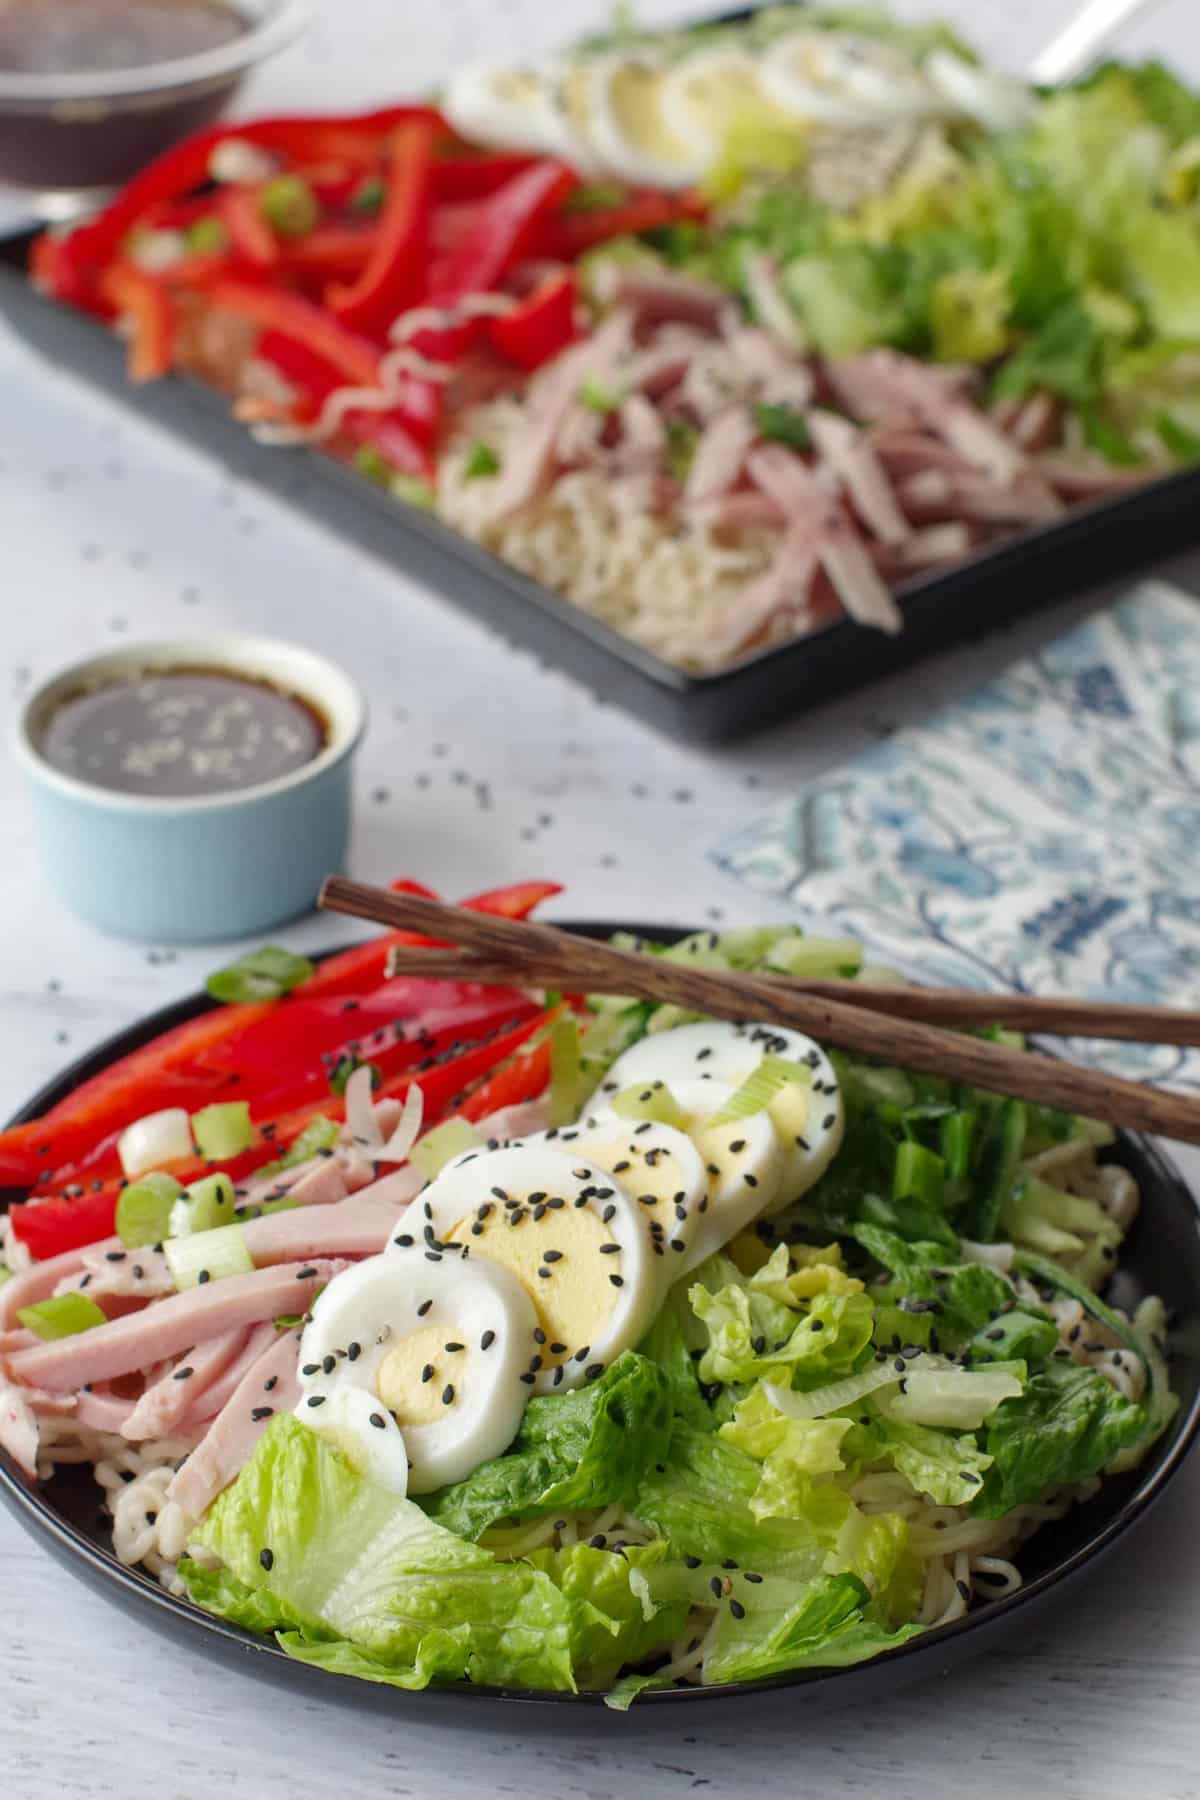 Japanese cold noodle salad on a black plate, with chopsticks and a dish of dressing in the background, as well as a black serving tray with more salad